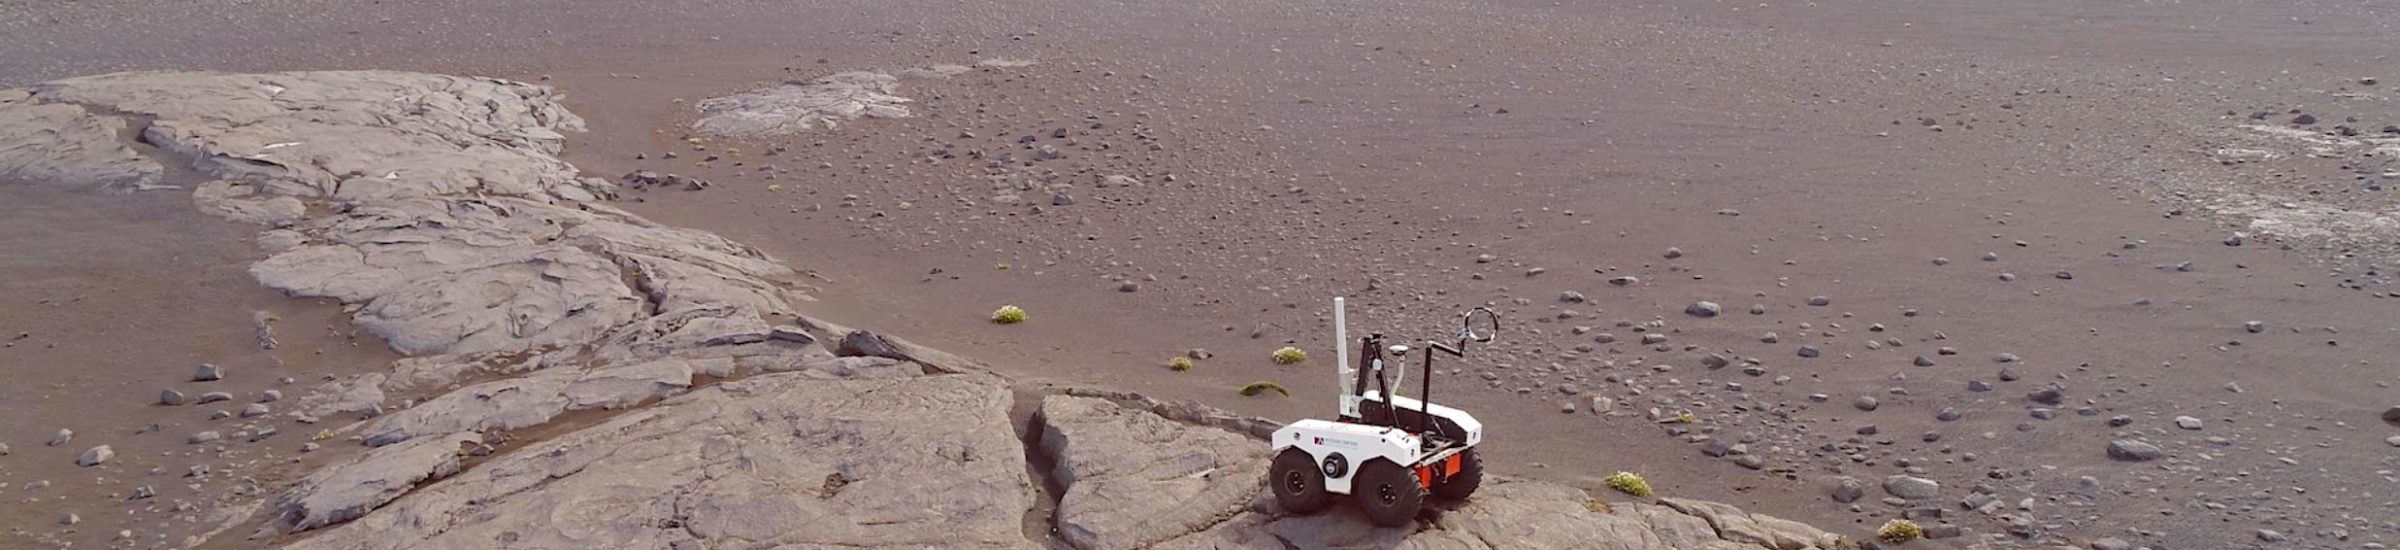 Ariel view of a rover in Iceland